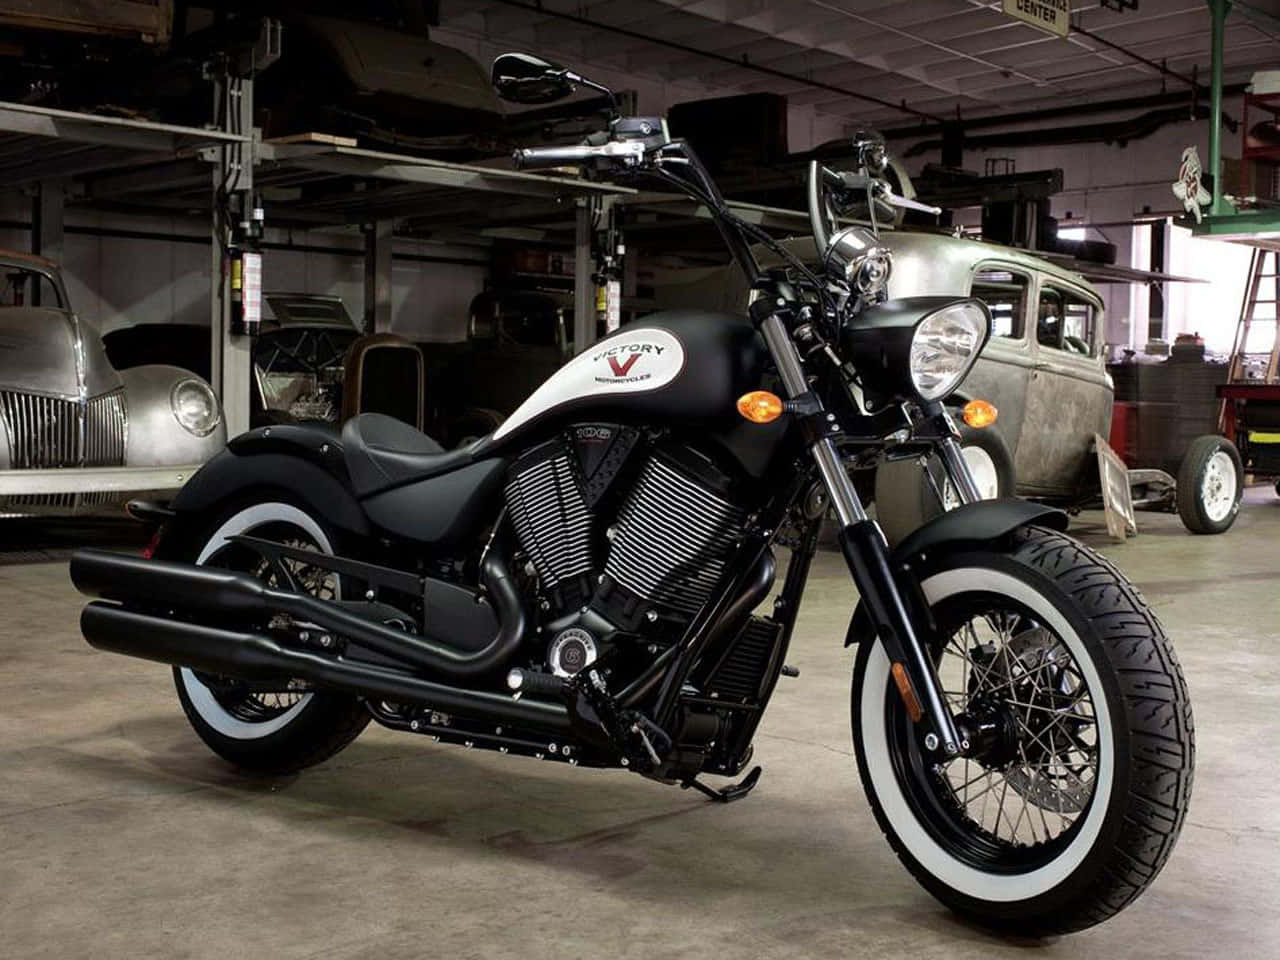 Bold Ride: 2016 Victory Magnum Blacked-out Motorcycle